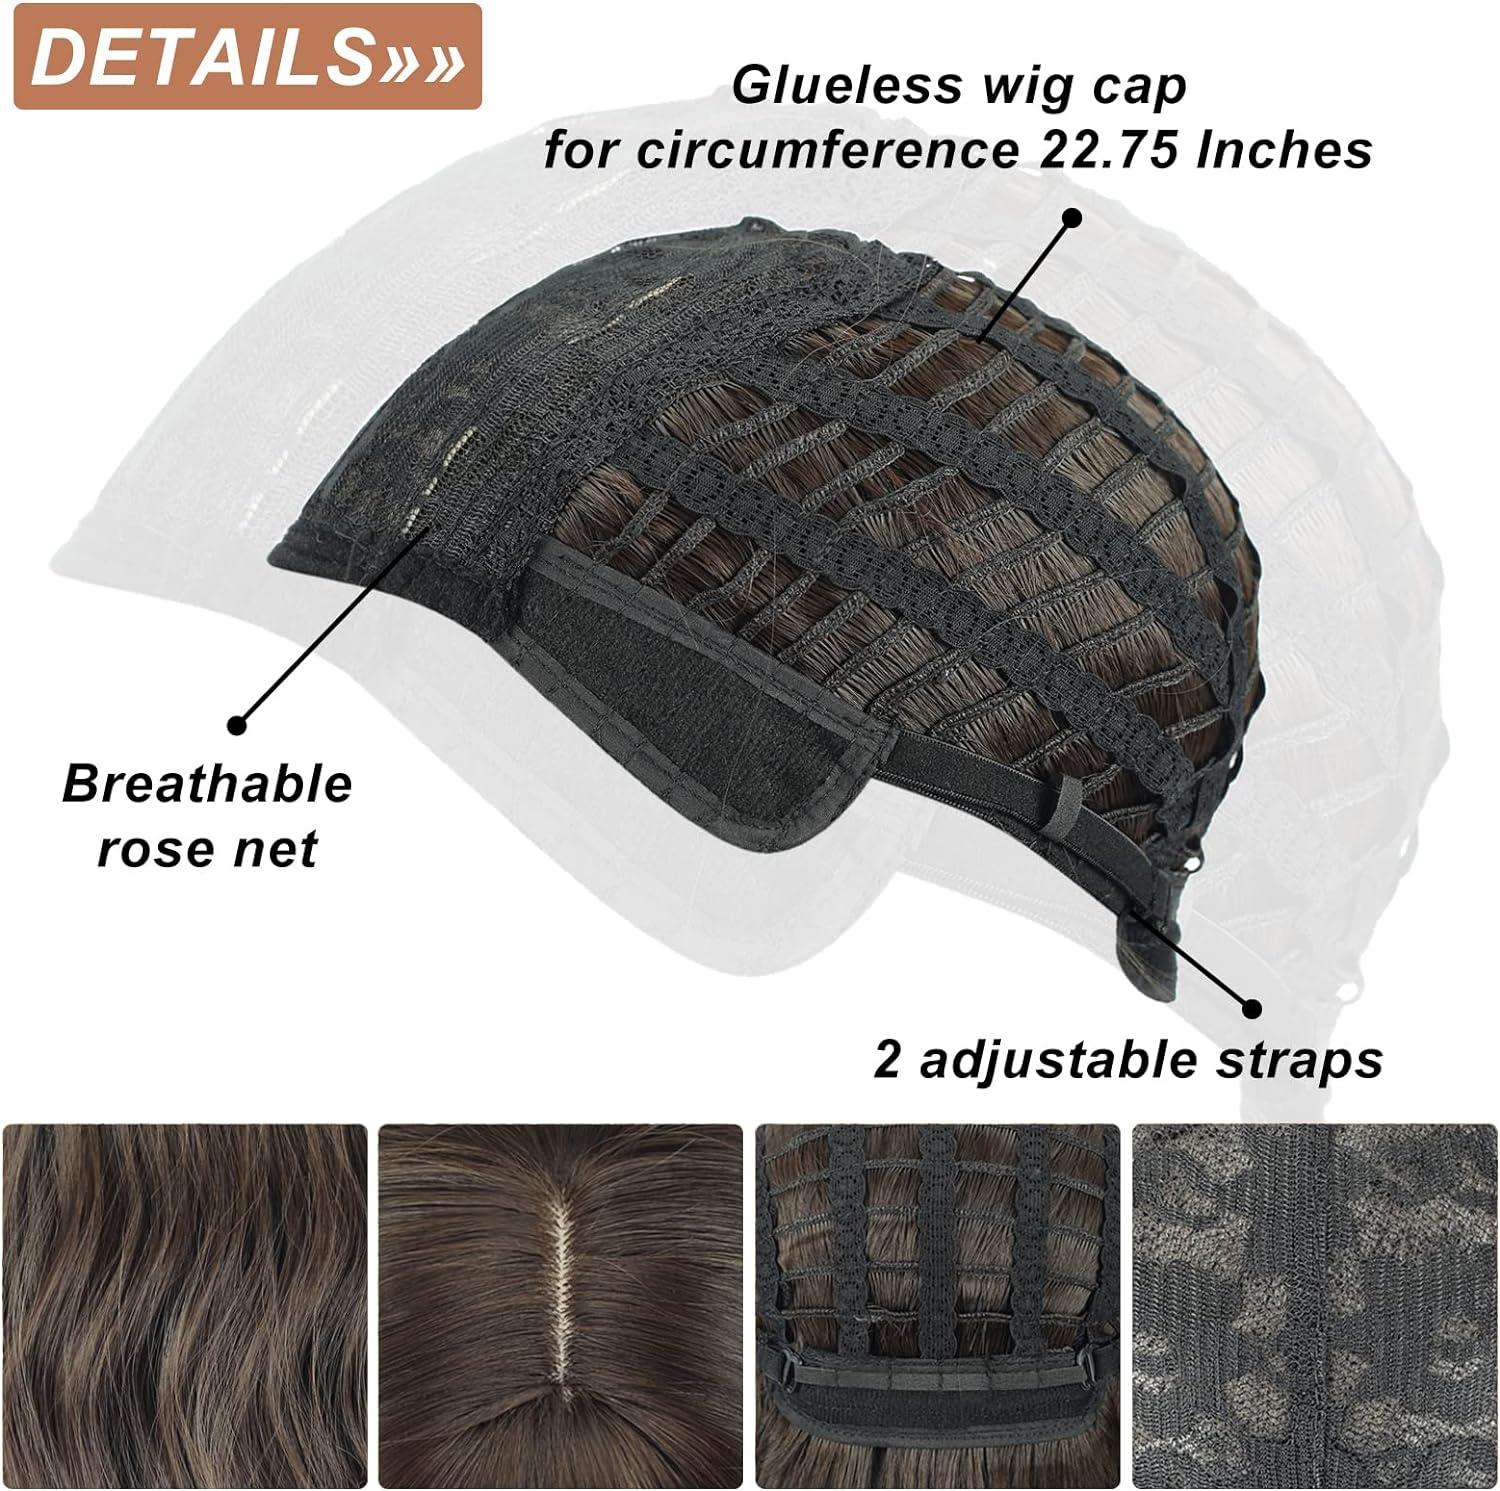 Dark Wig Cap for Adults | Adult | Unisex | Black | One-Size | Fun Costumes